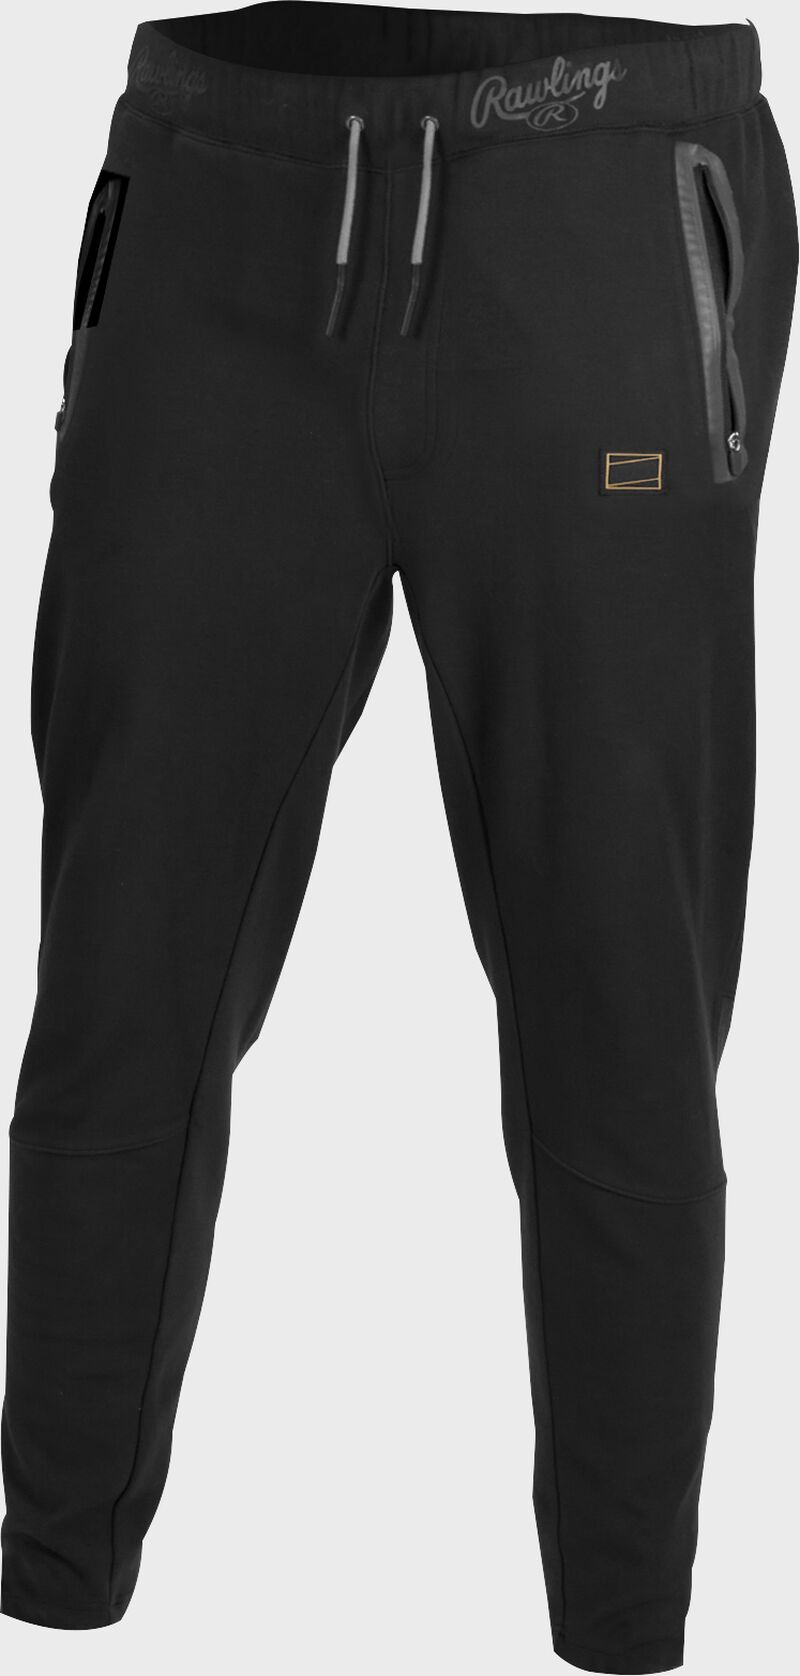 Rawlings Gold Collection Adult Jogger Style Pant, Black, Small, Men's